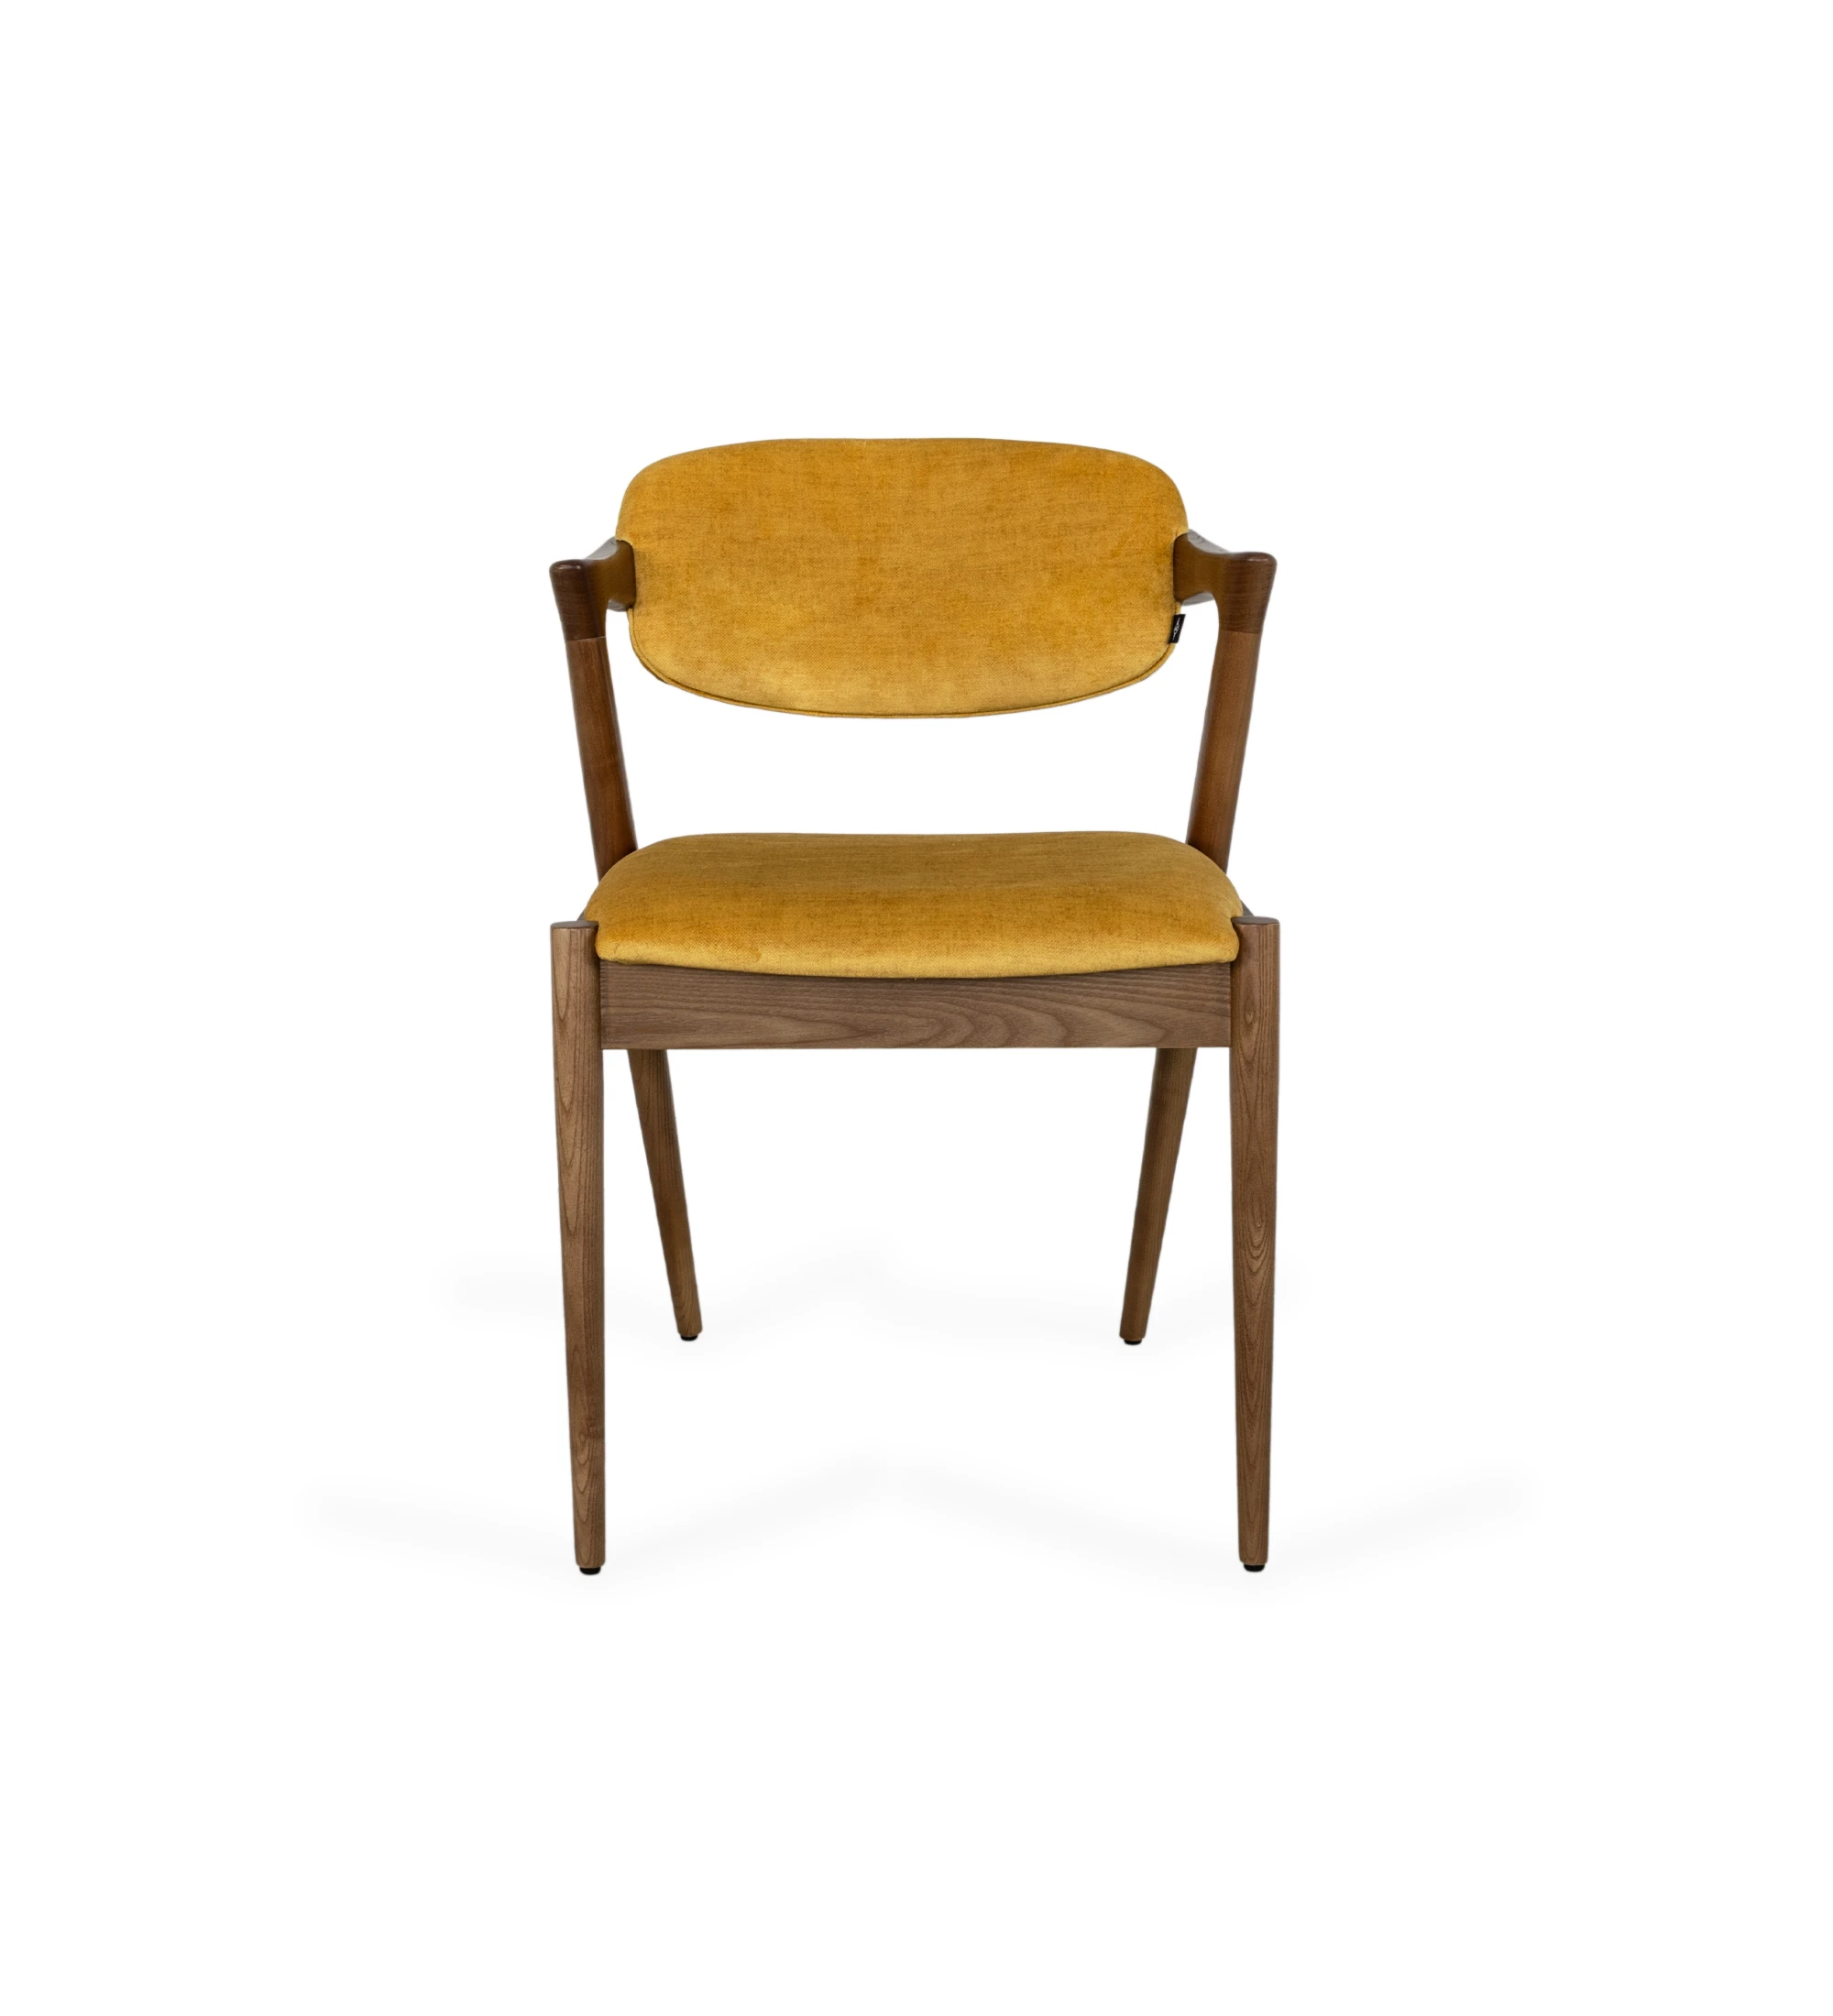 Chair with walnut wood structure, with seat and back upholstered in fabric.